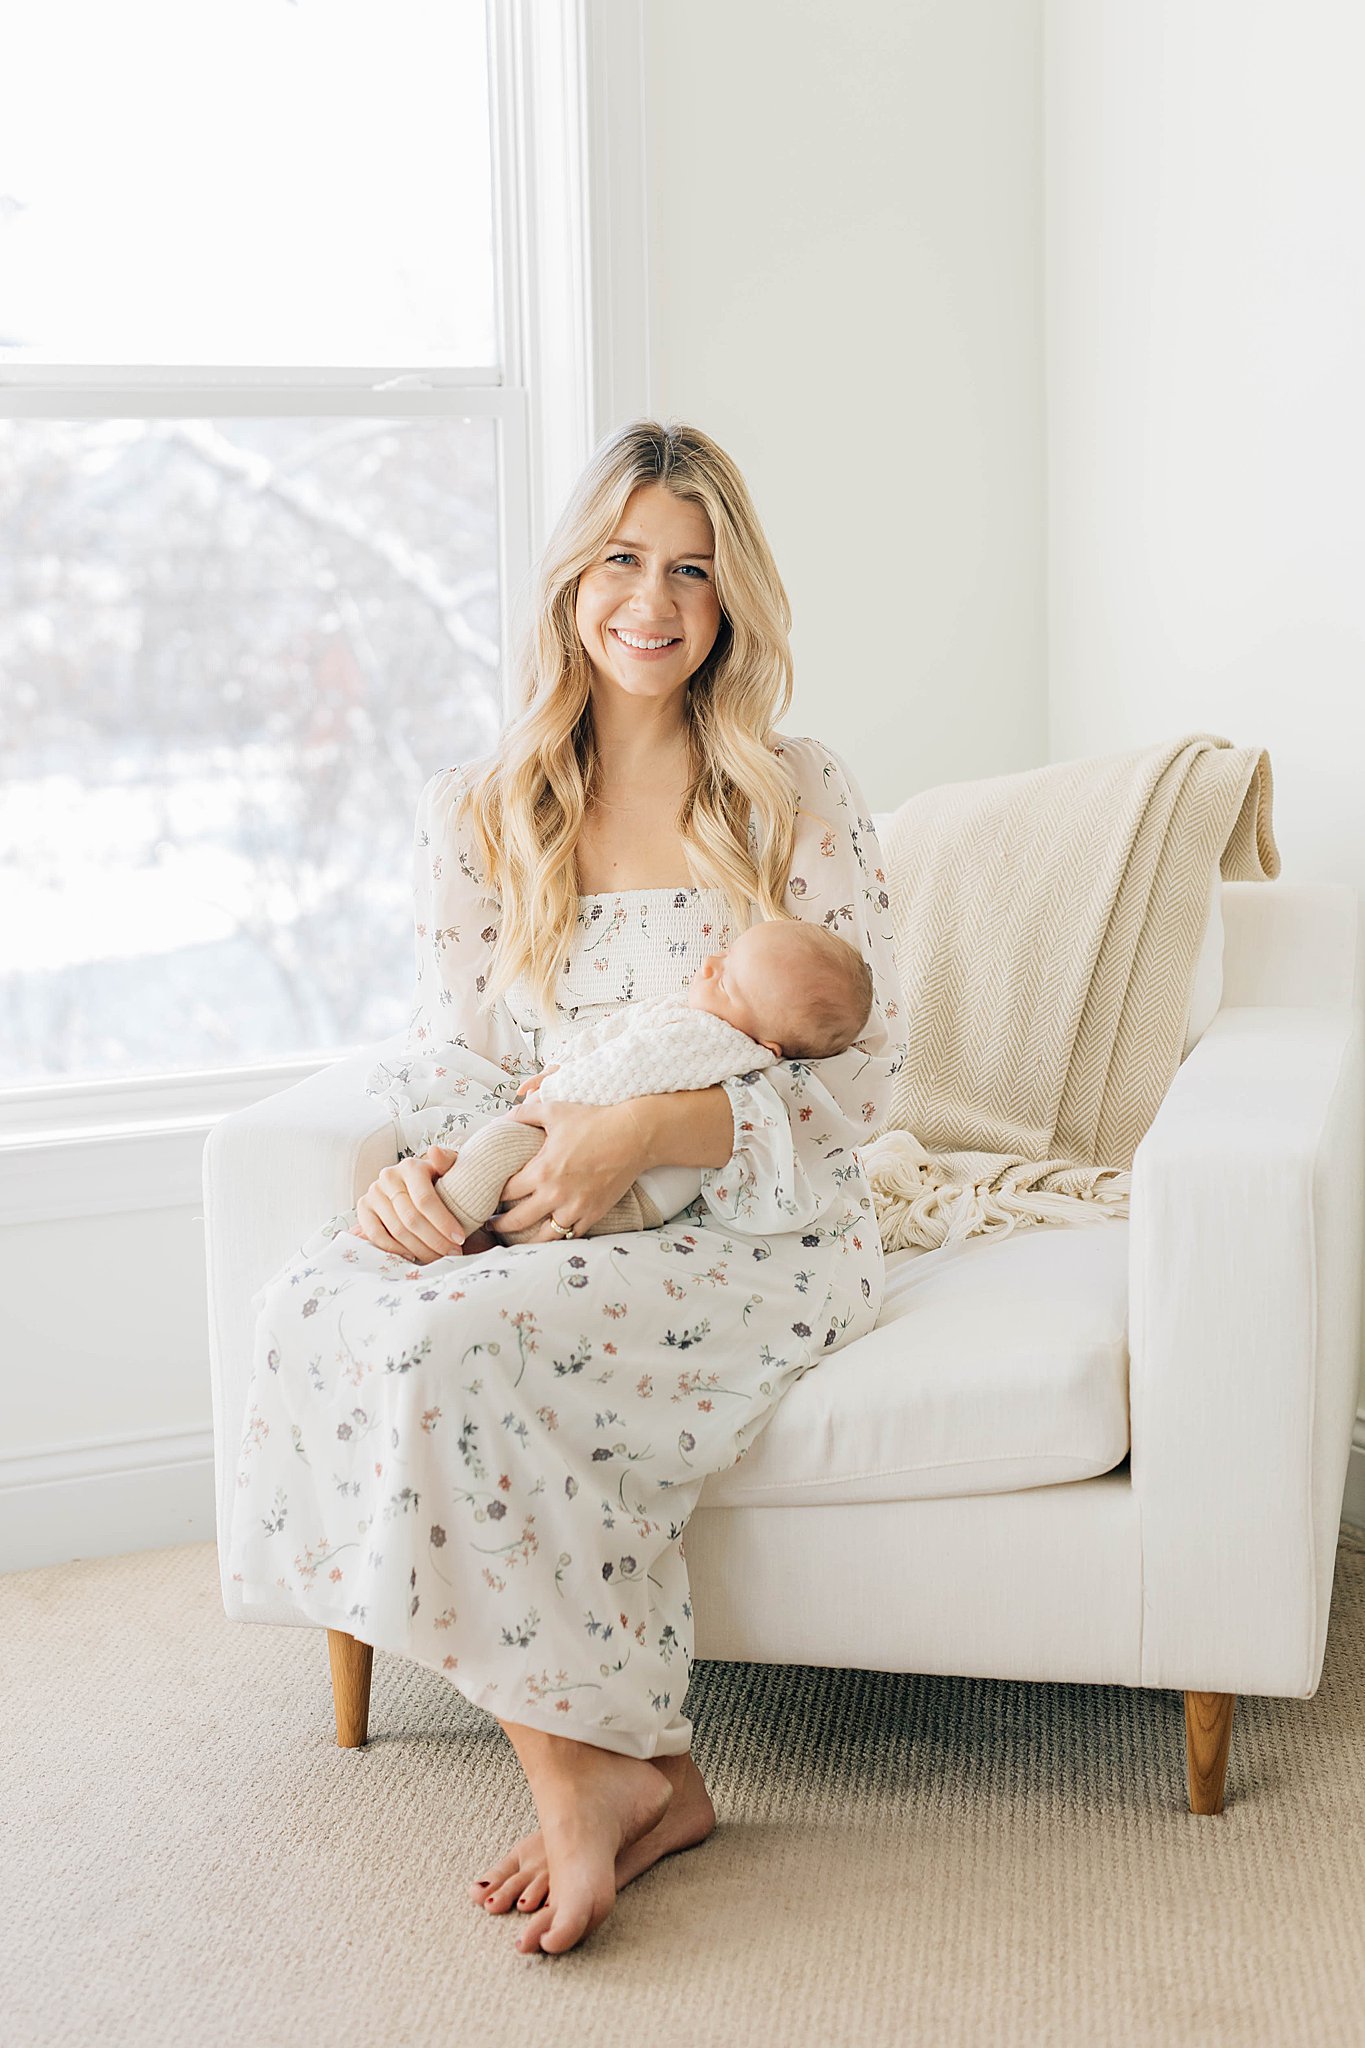 Mom holding newborn, with mom wearing long dress for outfit for newborn photos. 